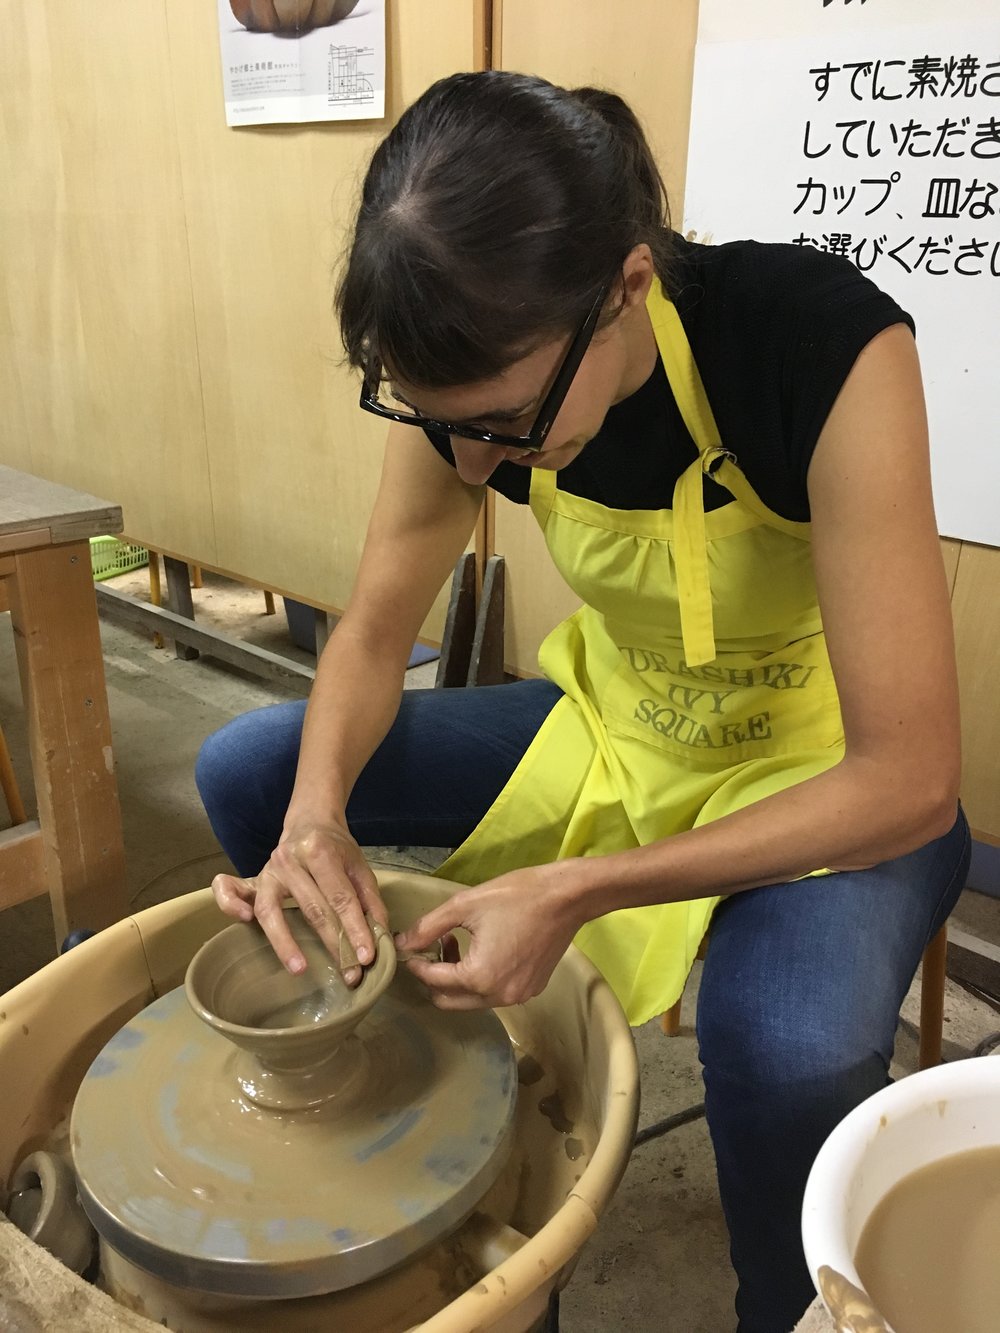  At work on the potter's wheel 